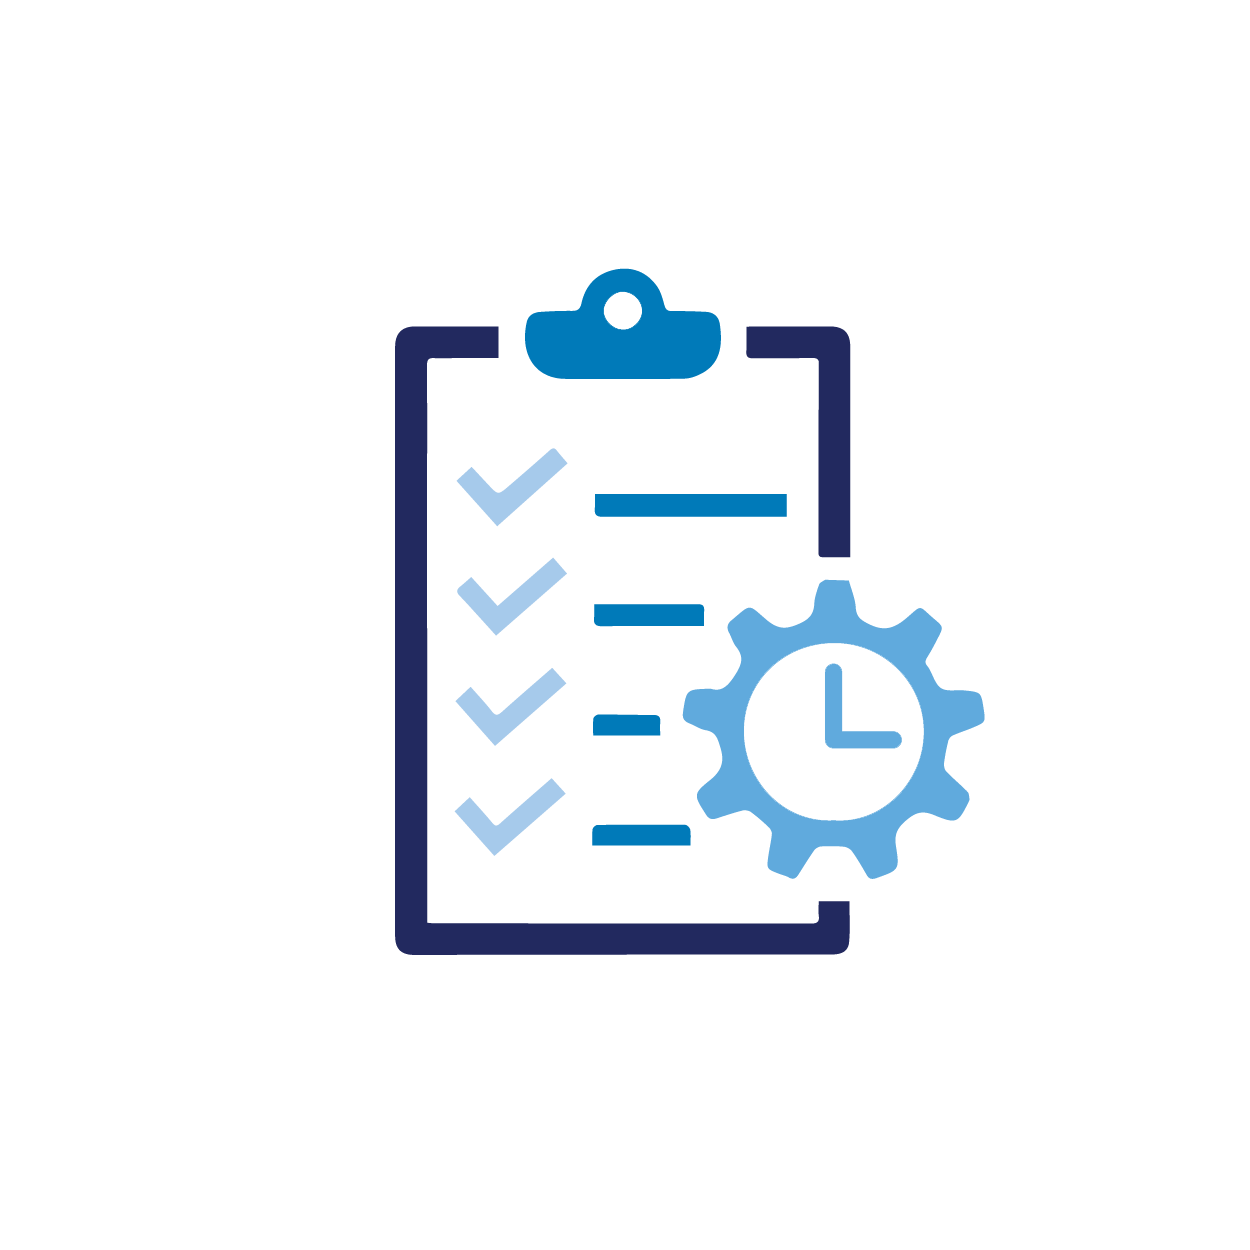 icon style image of a clipboard with checkmarks, gear and clock hands inside the gear to depict project management